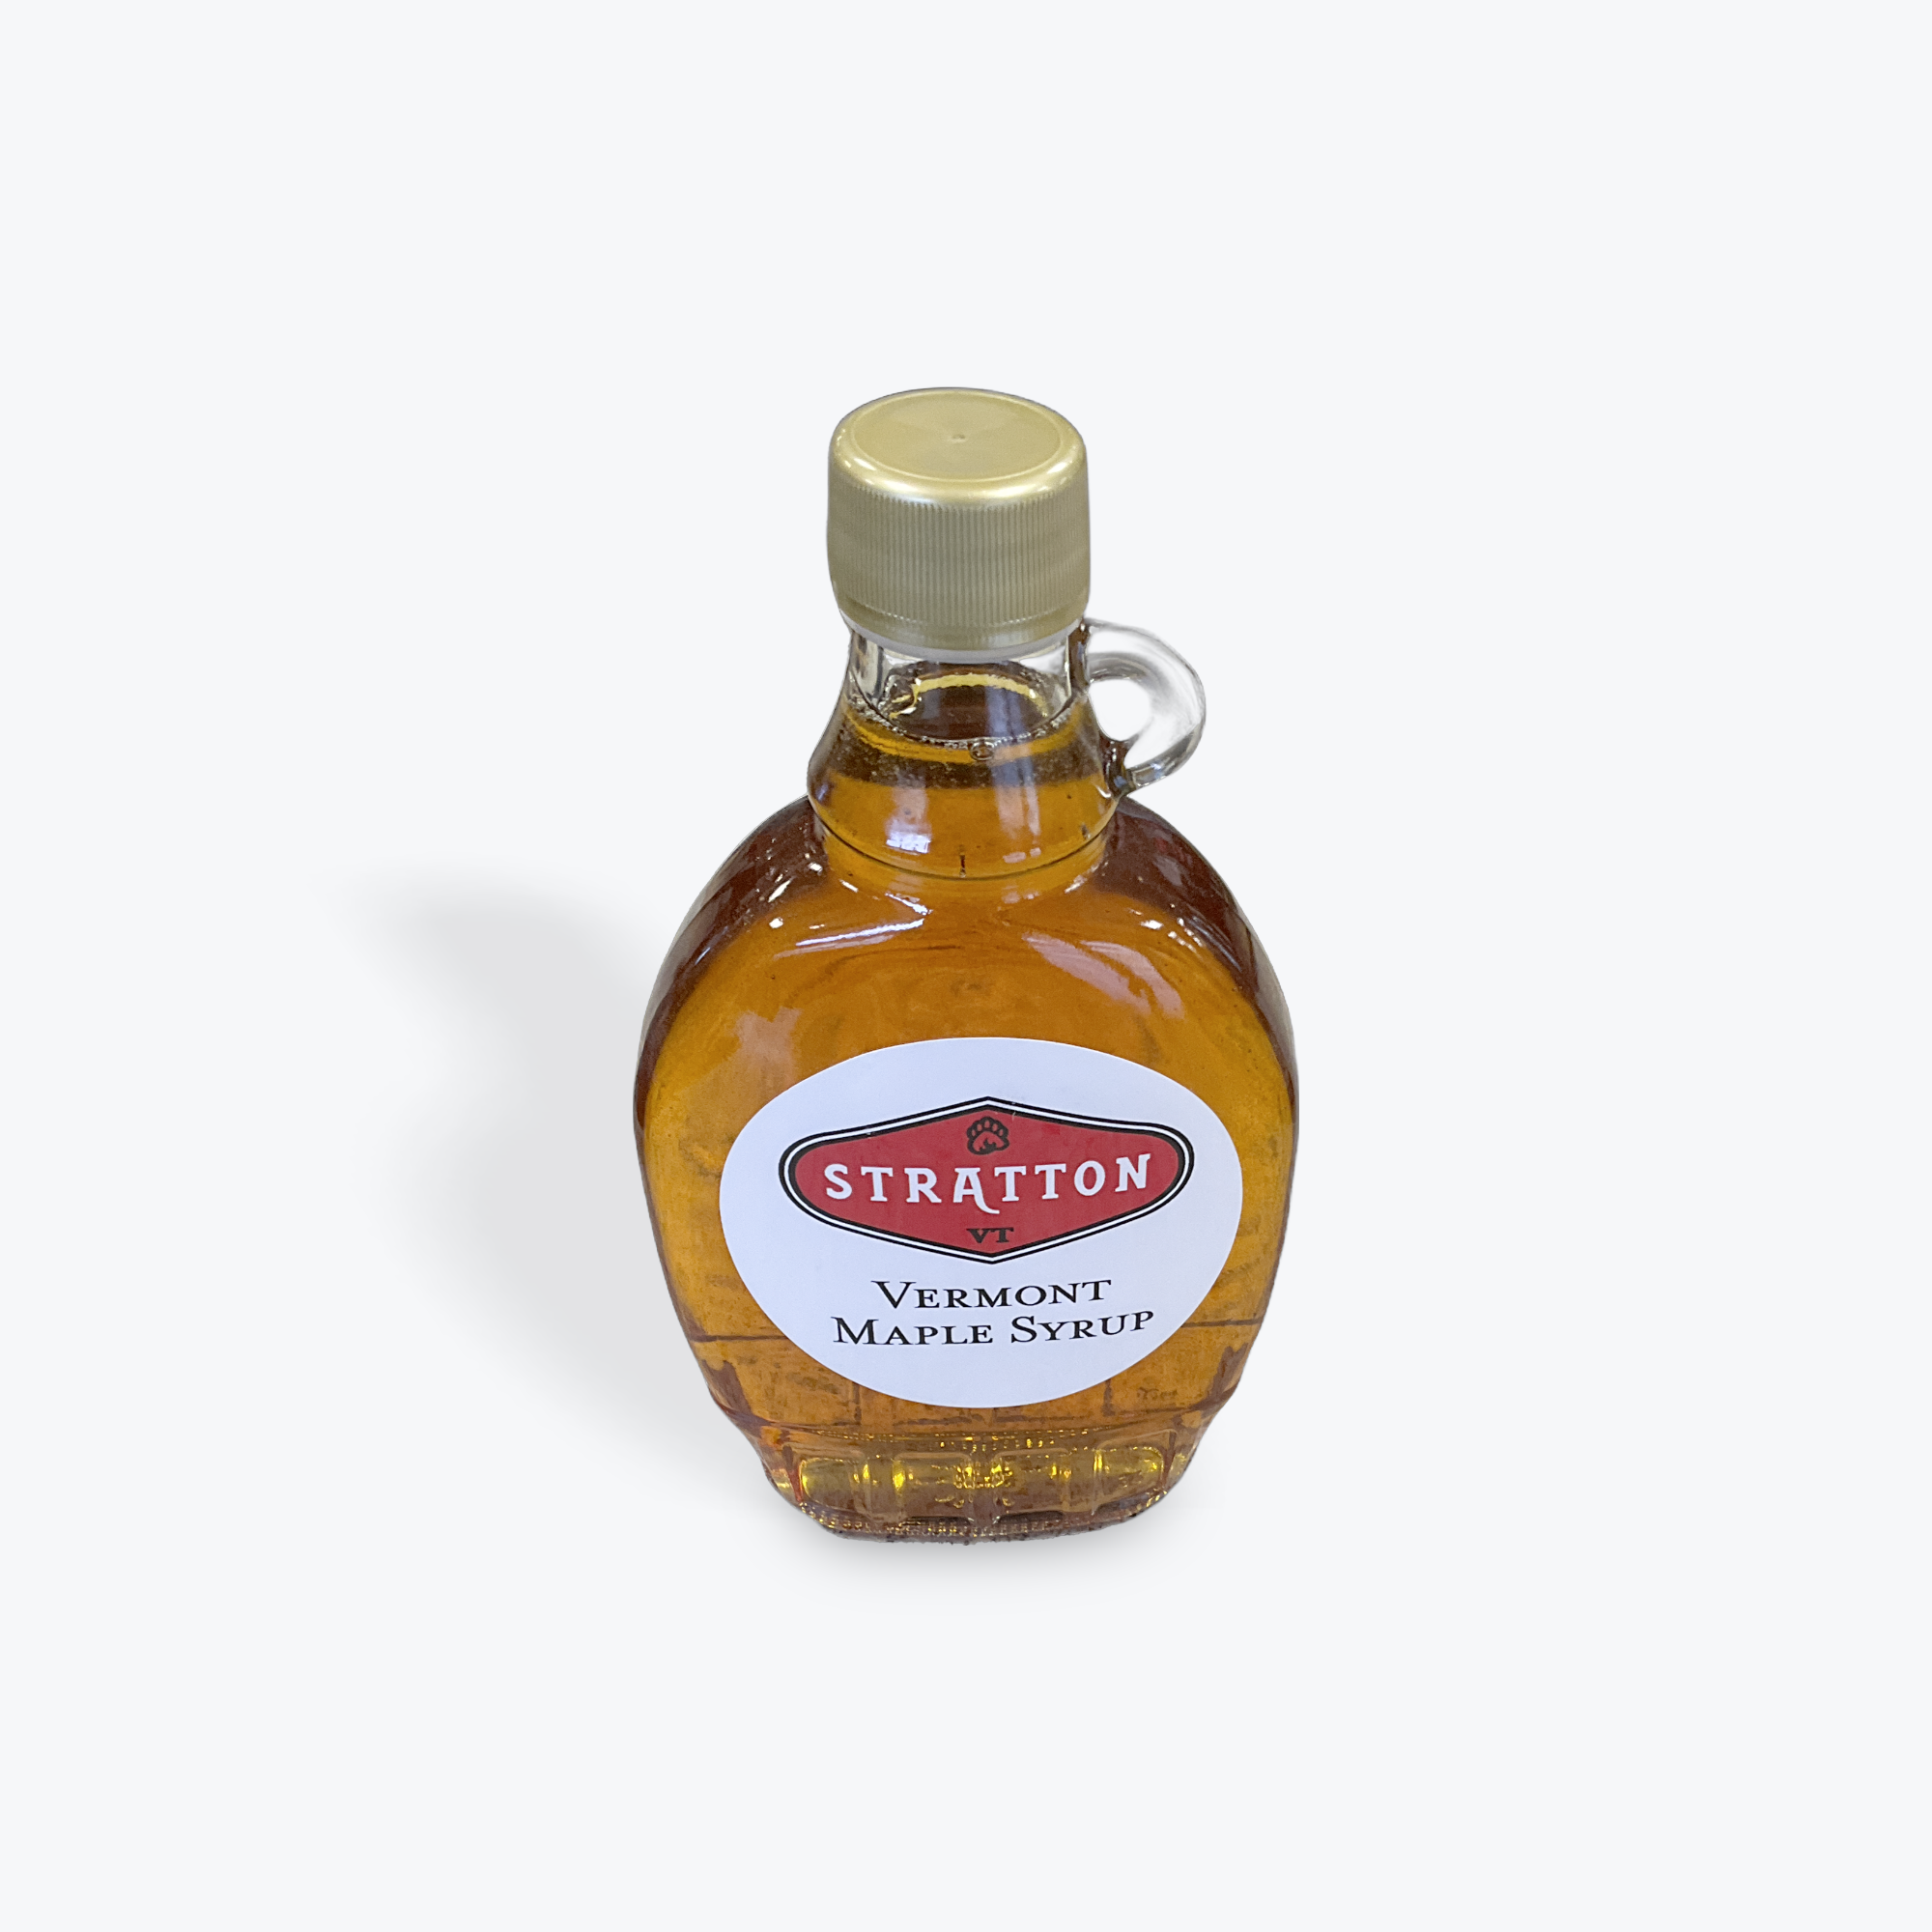 Stratton Maple Syrup